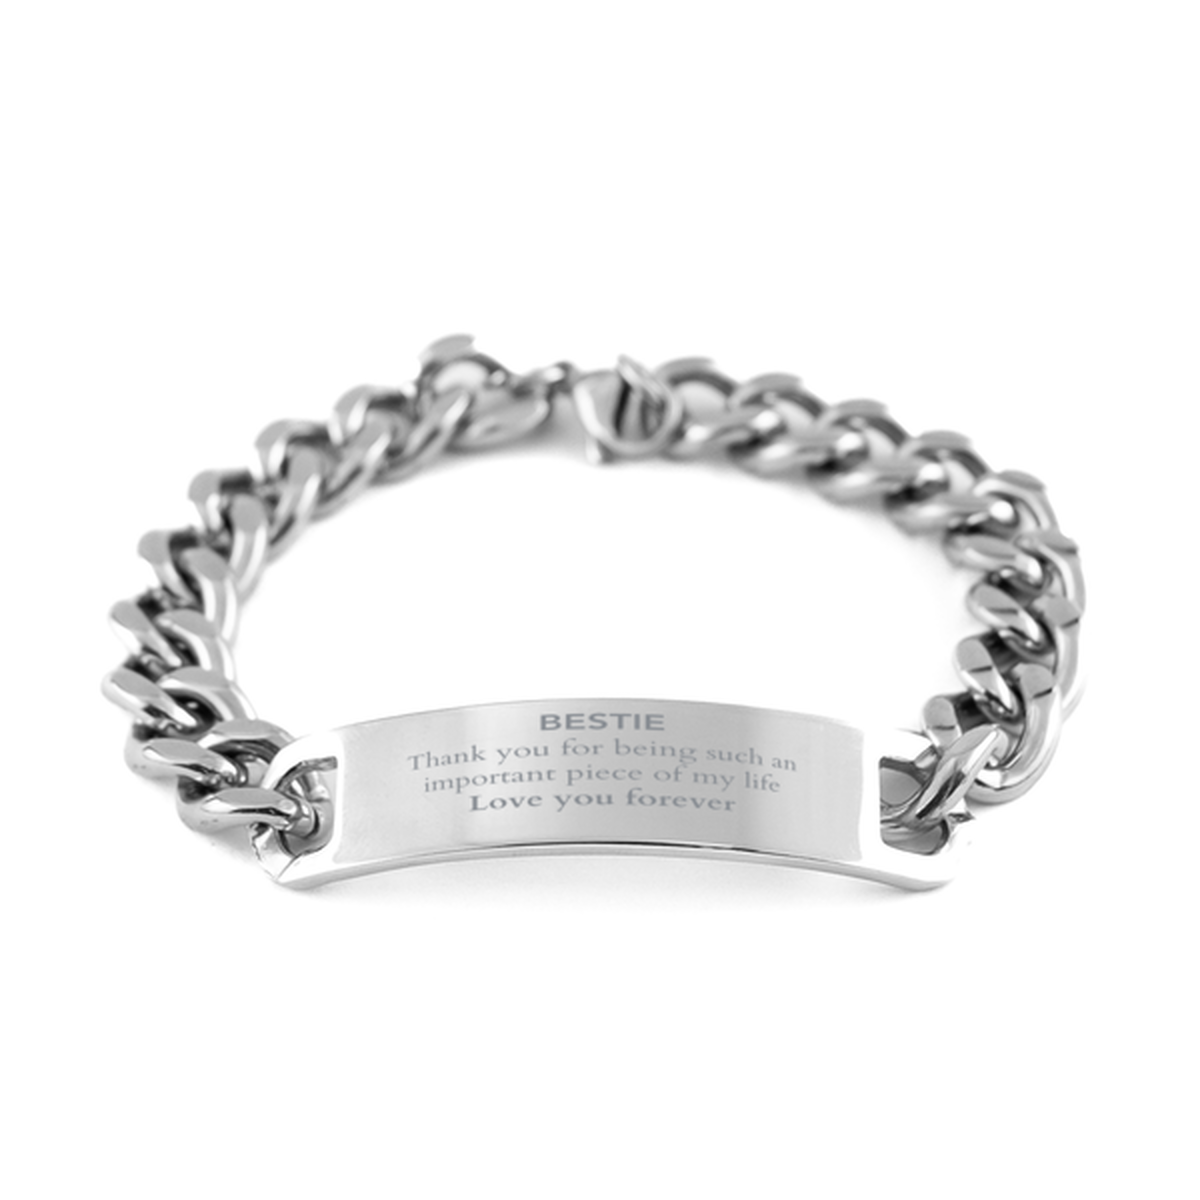 Appropriate Bestie Cuban Chain Stainless Steel Bracelet Epic Birthday Gifts for Bestie Thank you for being such an important piece of my life Bestie Christmas Mothers Fathers Day